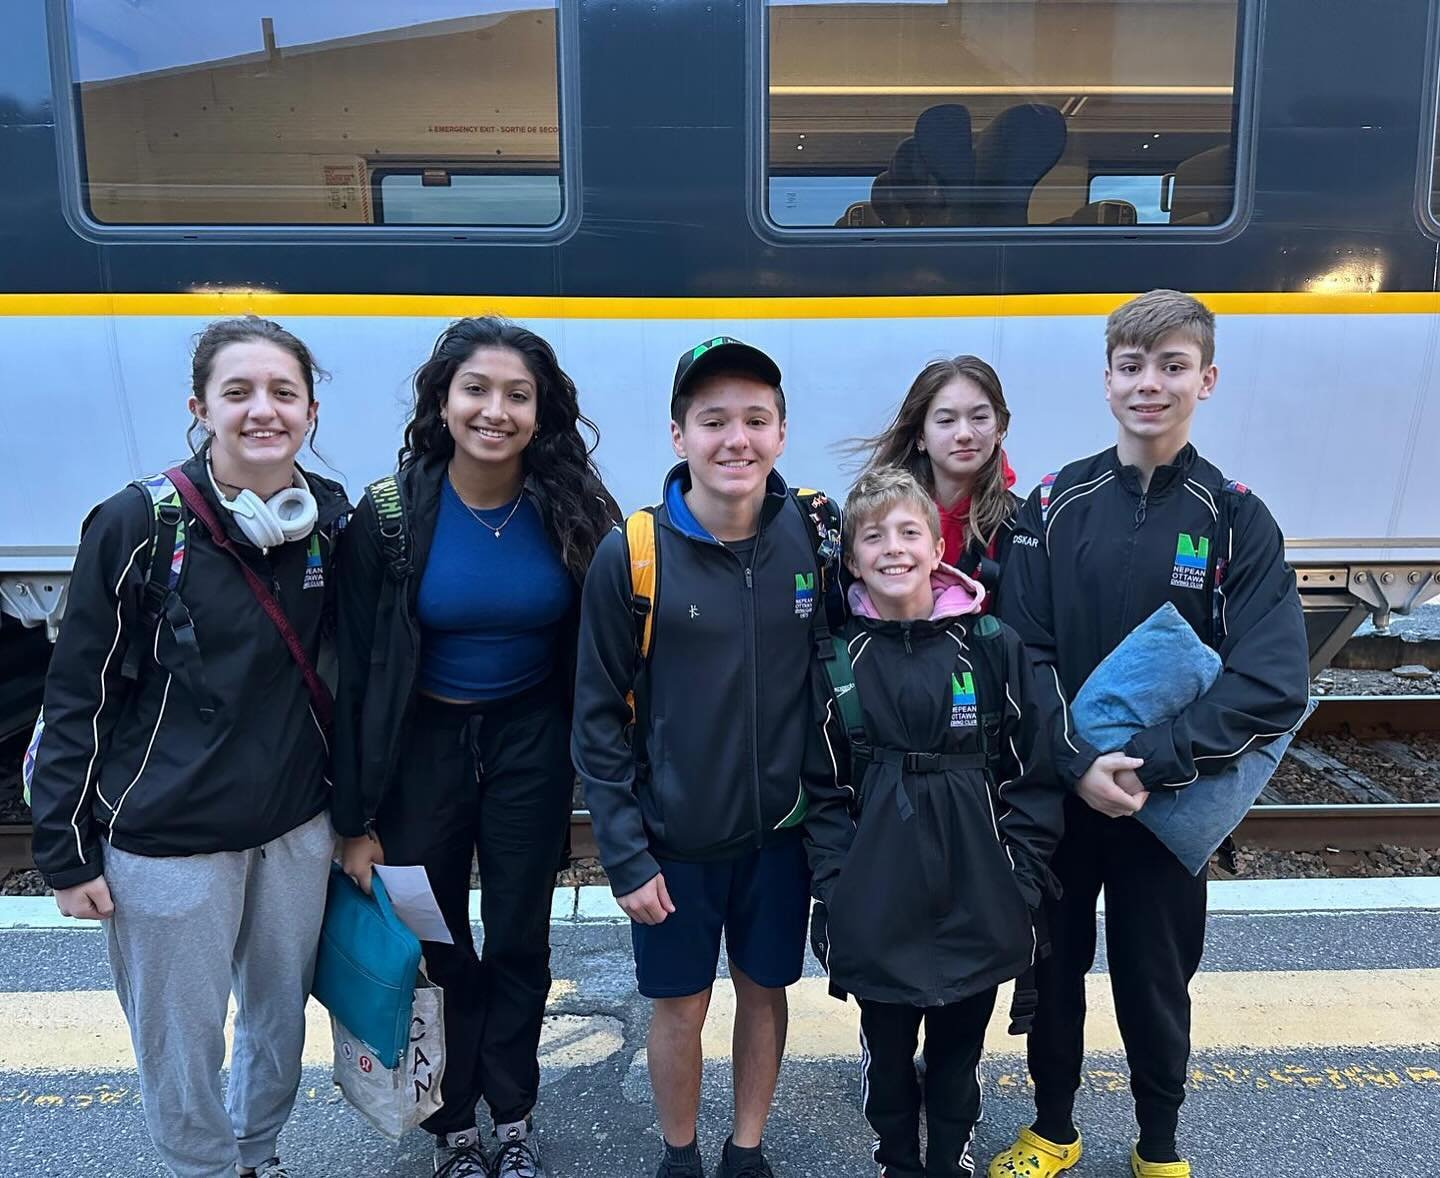 The team got on their way to Windsor this morning.  They are headed to the Ontario Summer Provincials!  @diveontario @windsordiving ##diving #wefly #plushaut #springboarddiving #platformdiving #ripit #provincials